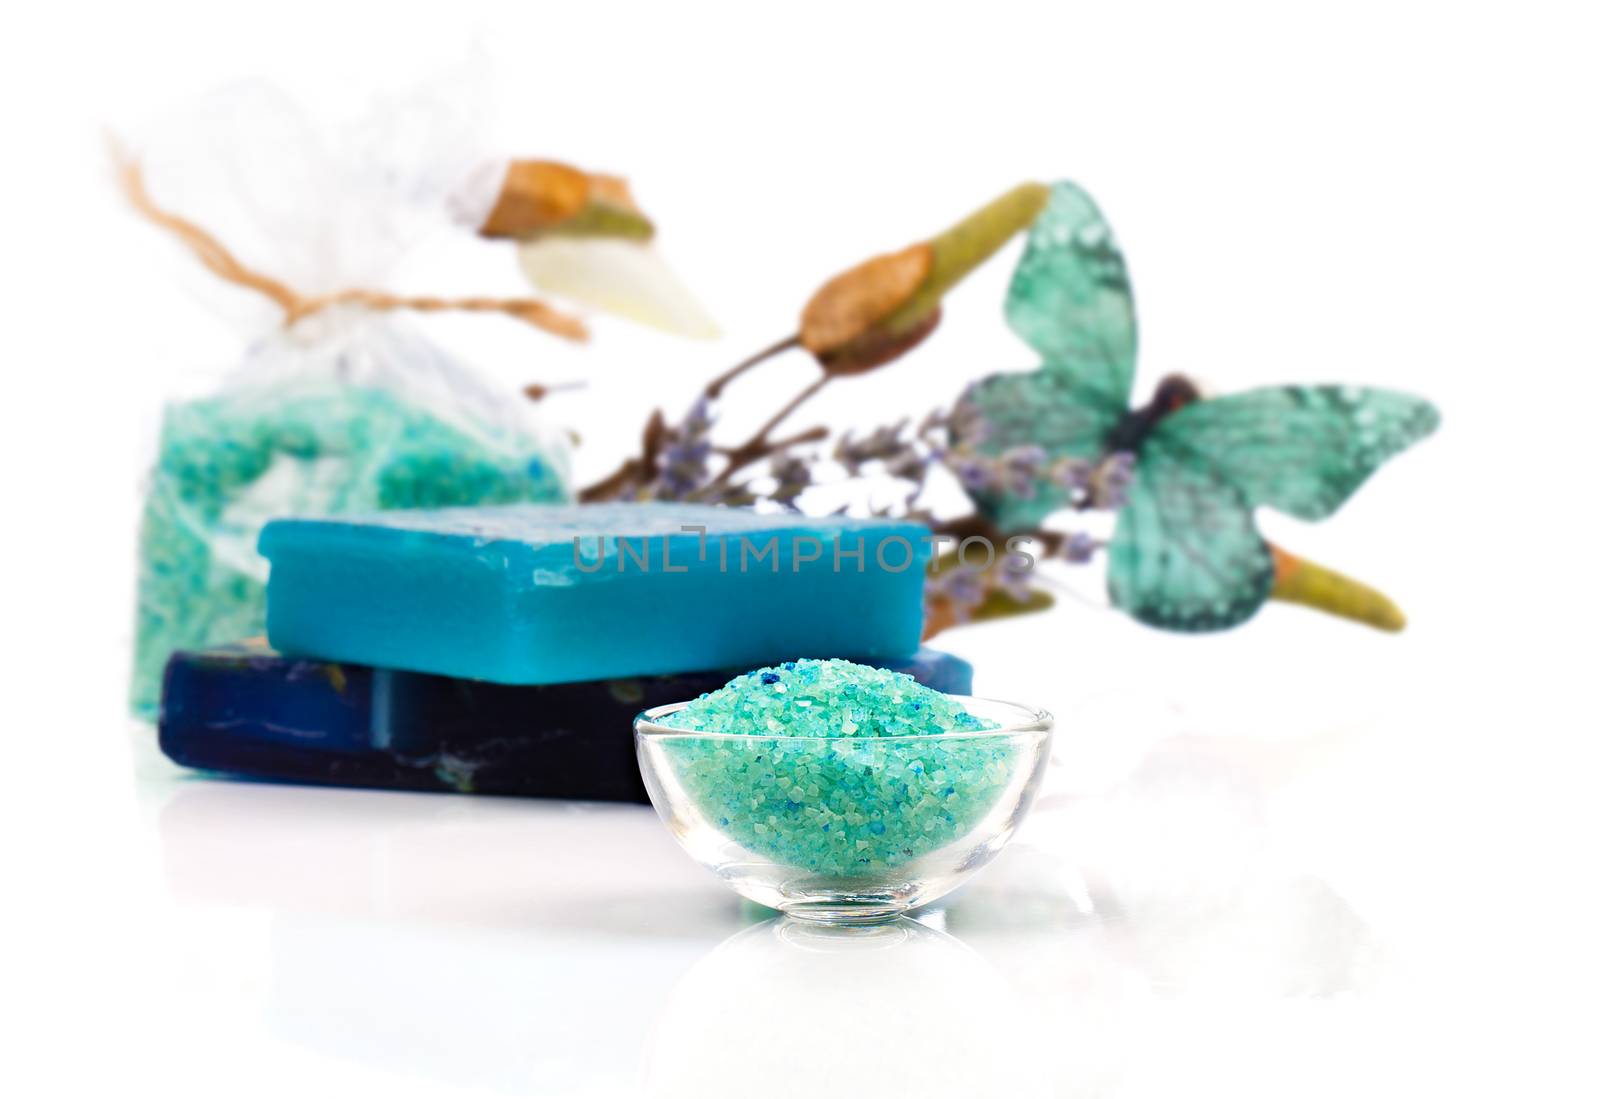 Spa treatment with turquoise bath salts, on white background